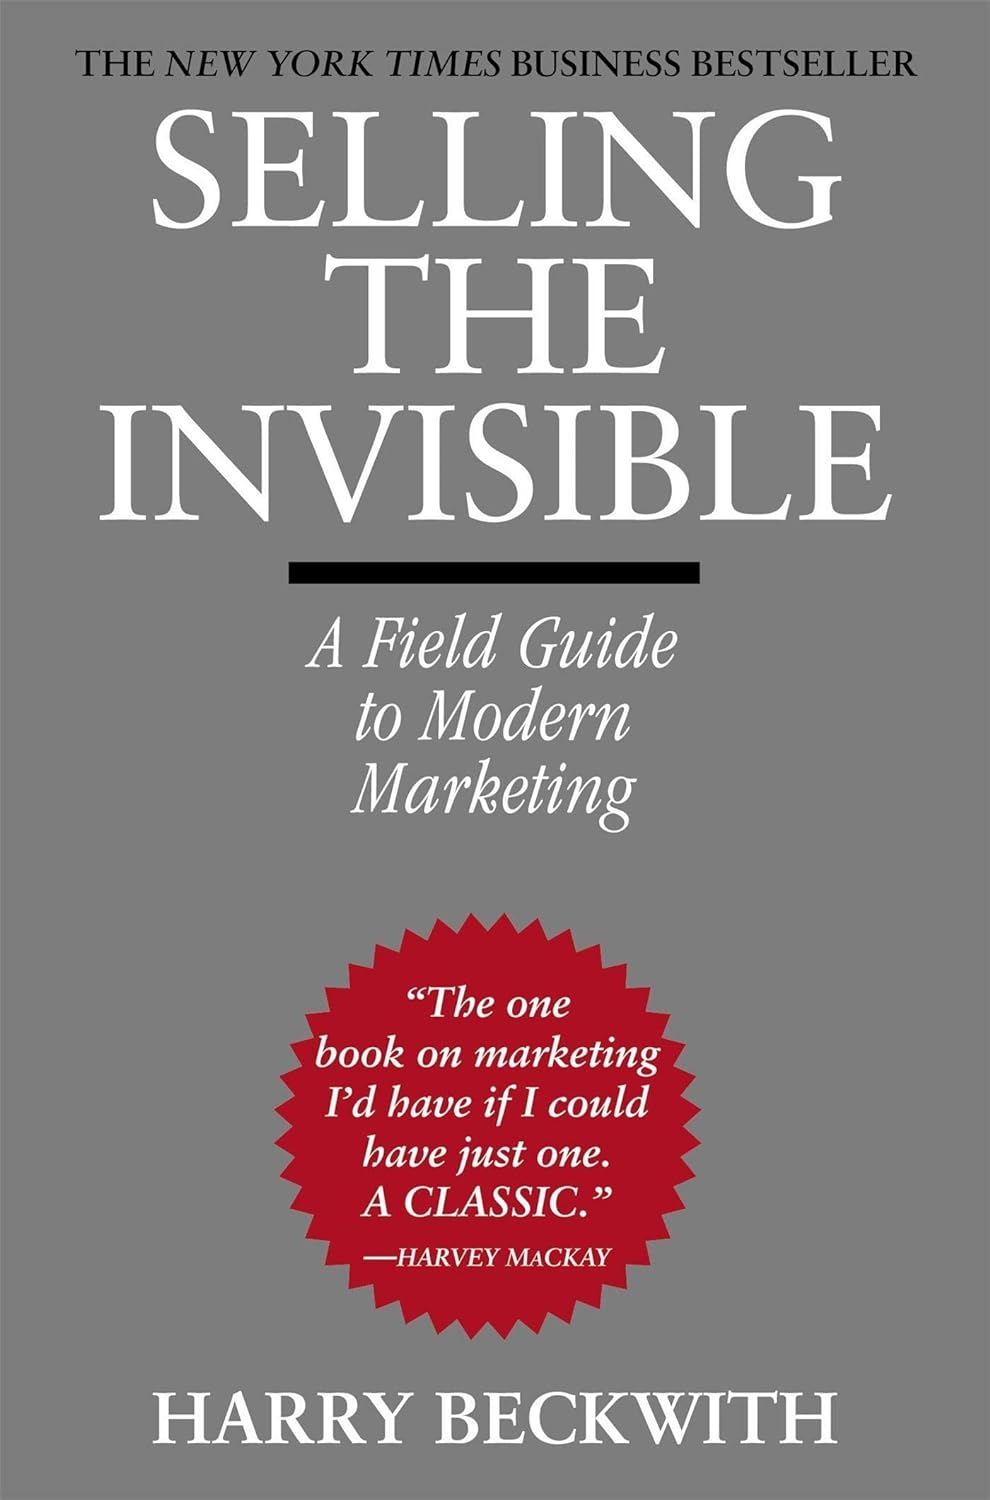 Harry Beckwith - Selling the Invisible. A Field Guide to Modern Marketing